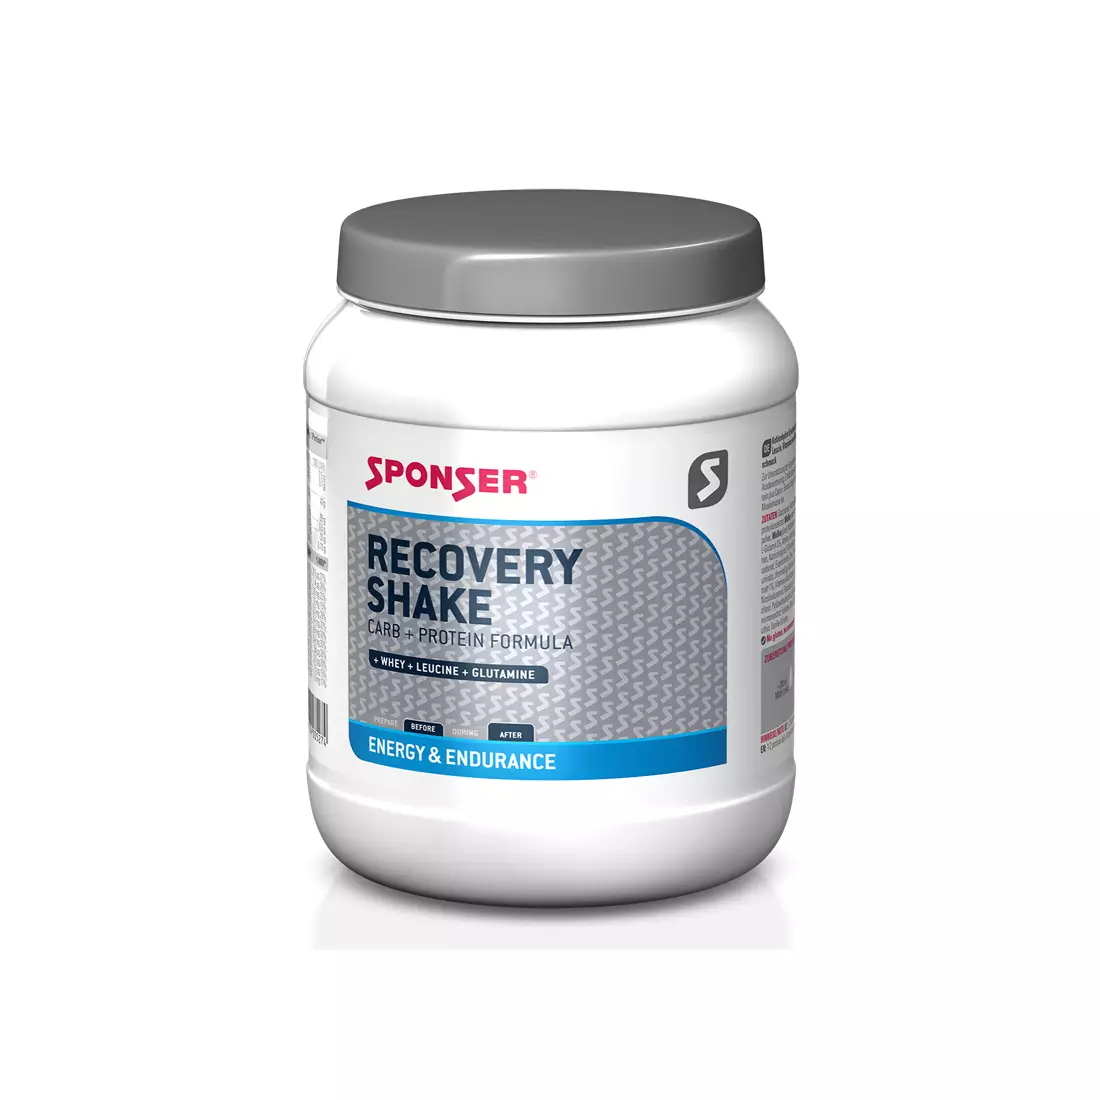 Drink SPONSER RECOVERY SHAKE vanilla can 900g